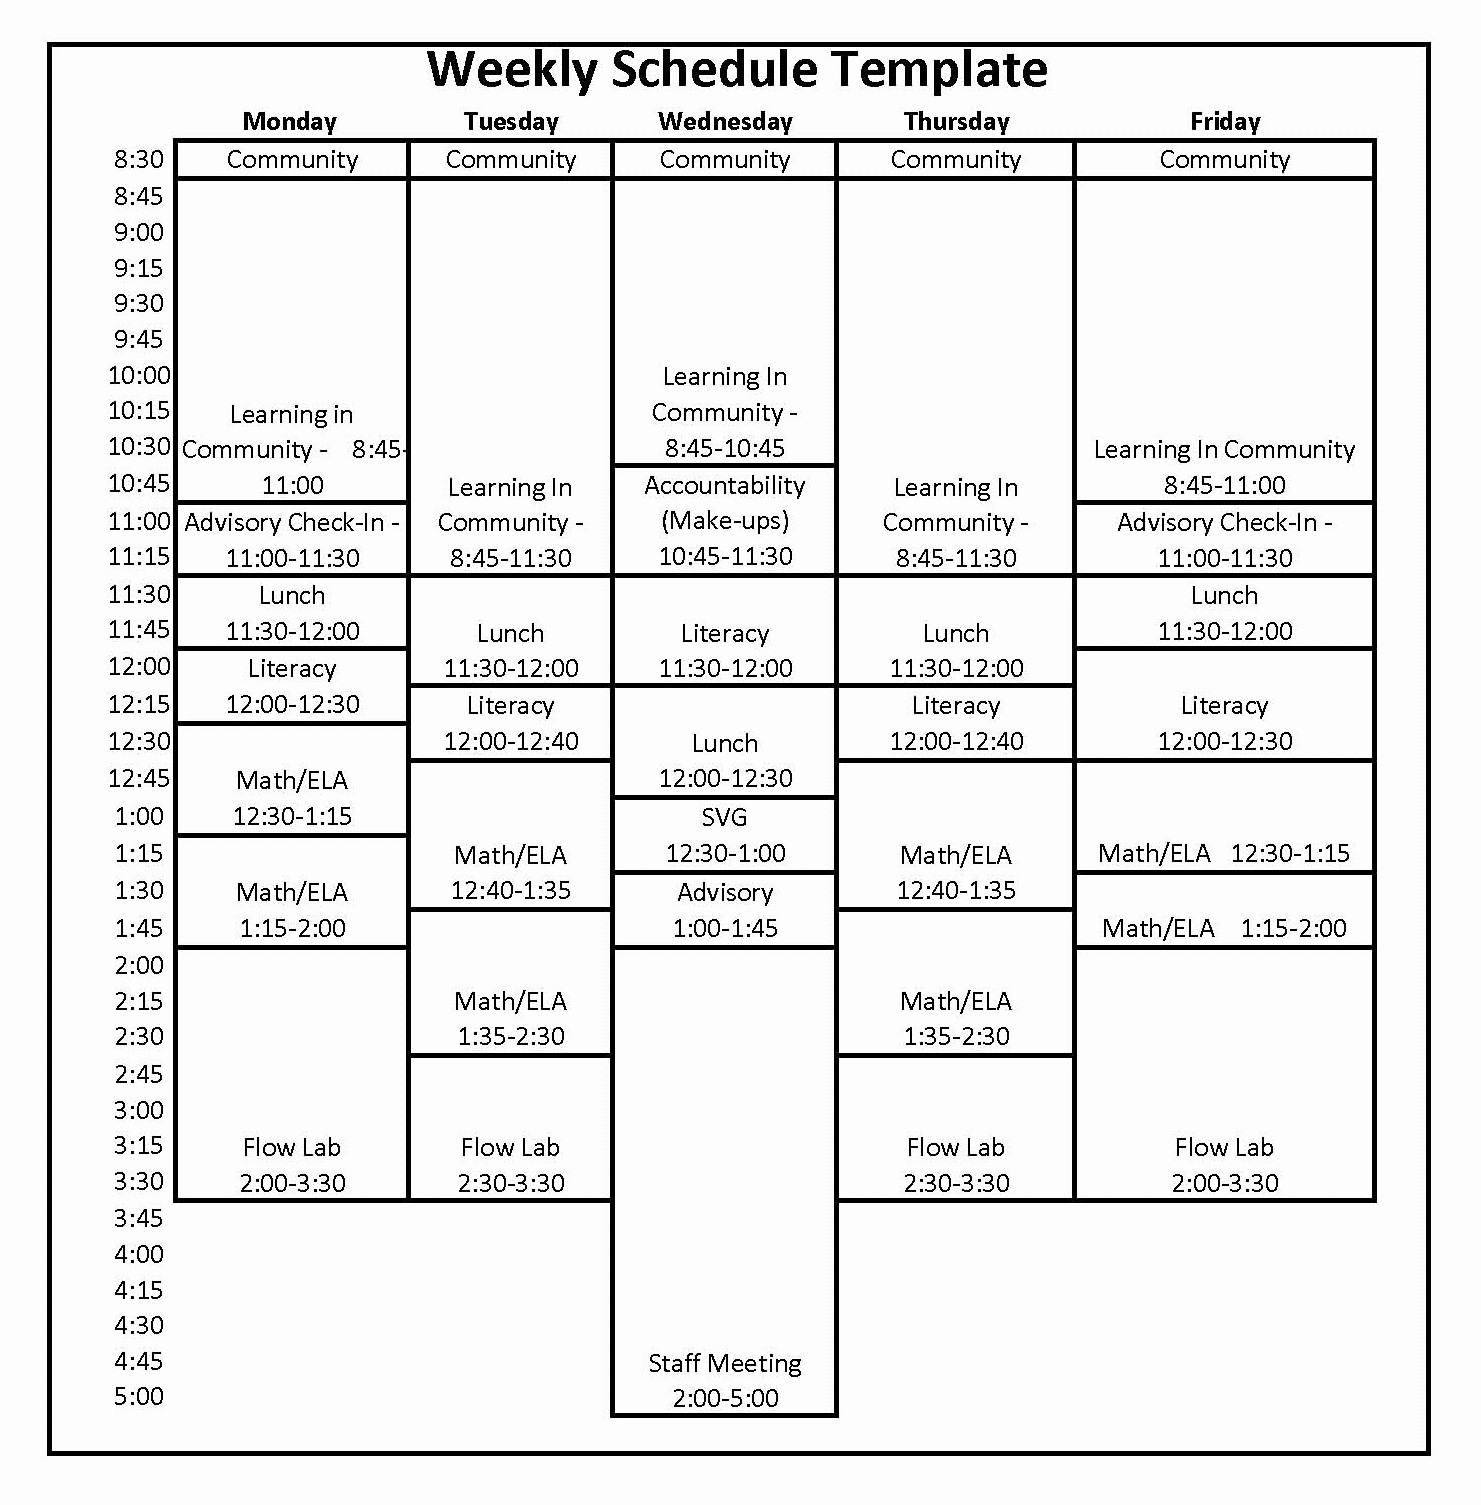 Weekly Schedule with Times Template Lovely Weekly Schedule